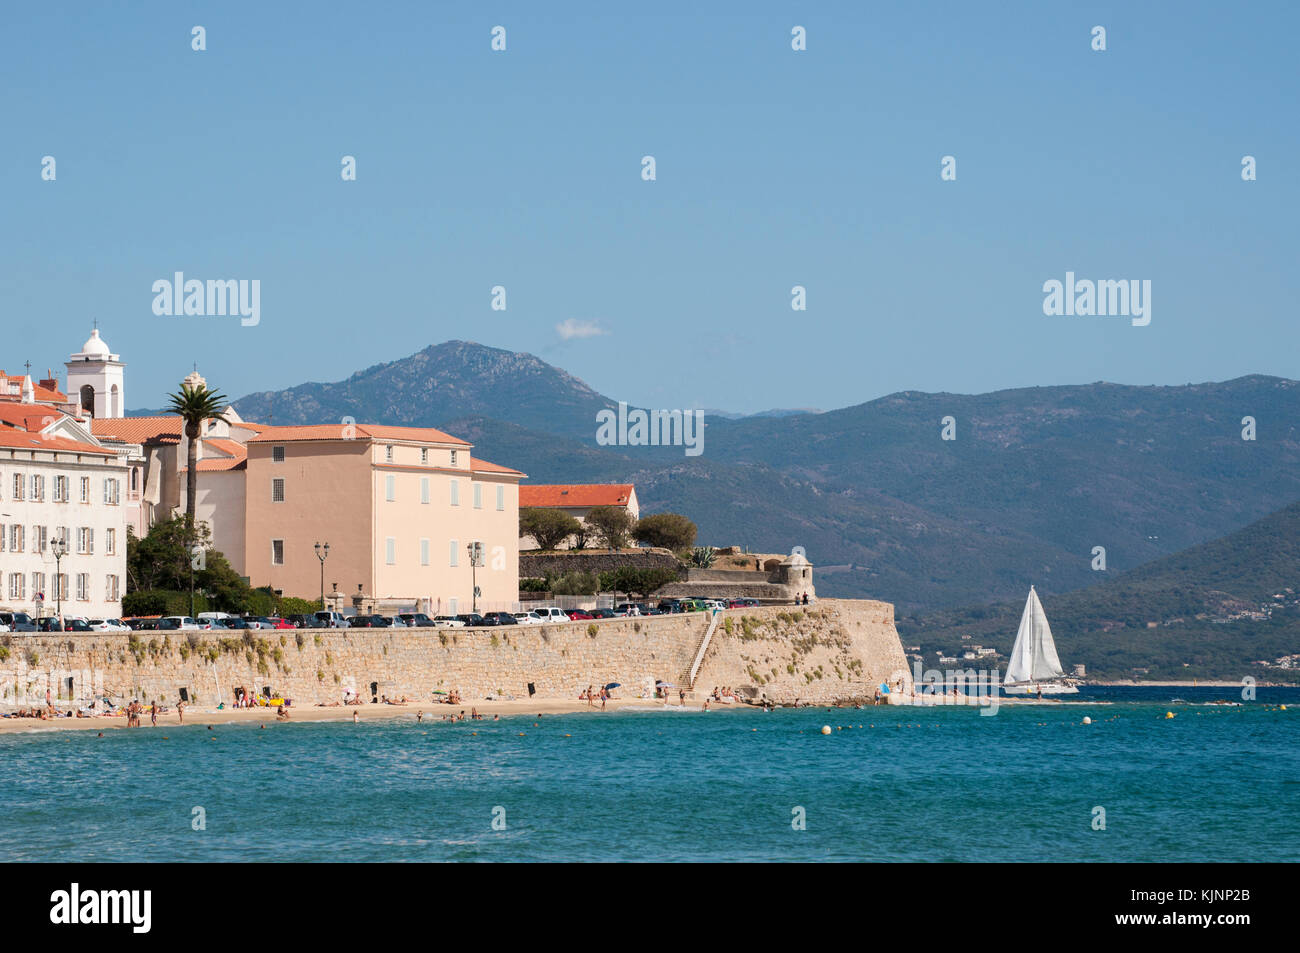 Ajaccio, Corsica: ancient walls of the 15th century Citadel, military fortress and prison during World War II, the Mediterranean Sea and urban beach Stock Photo